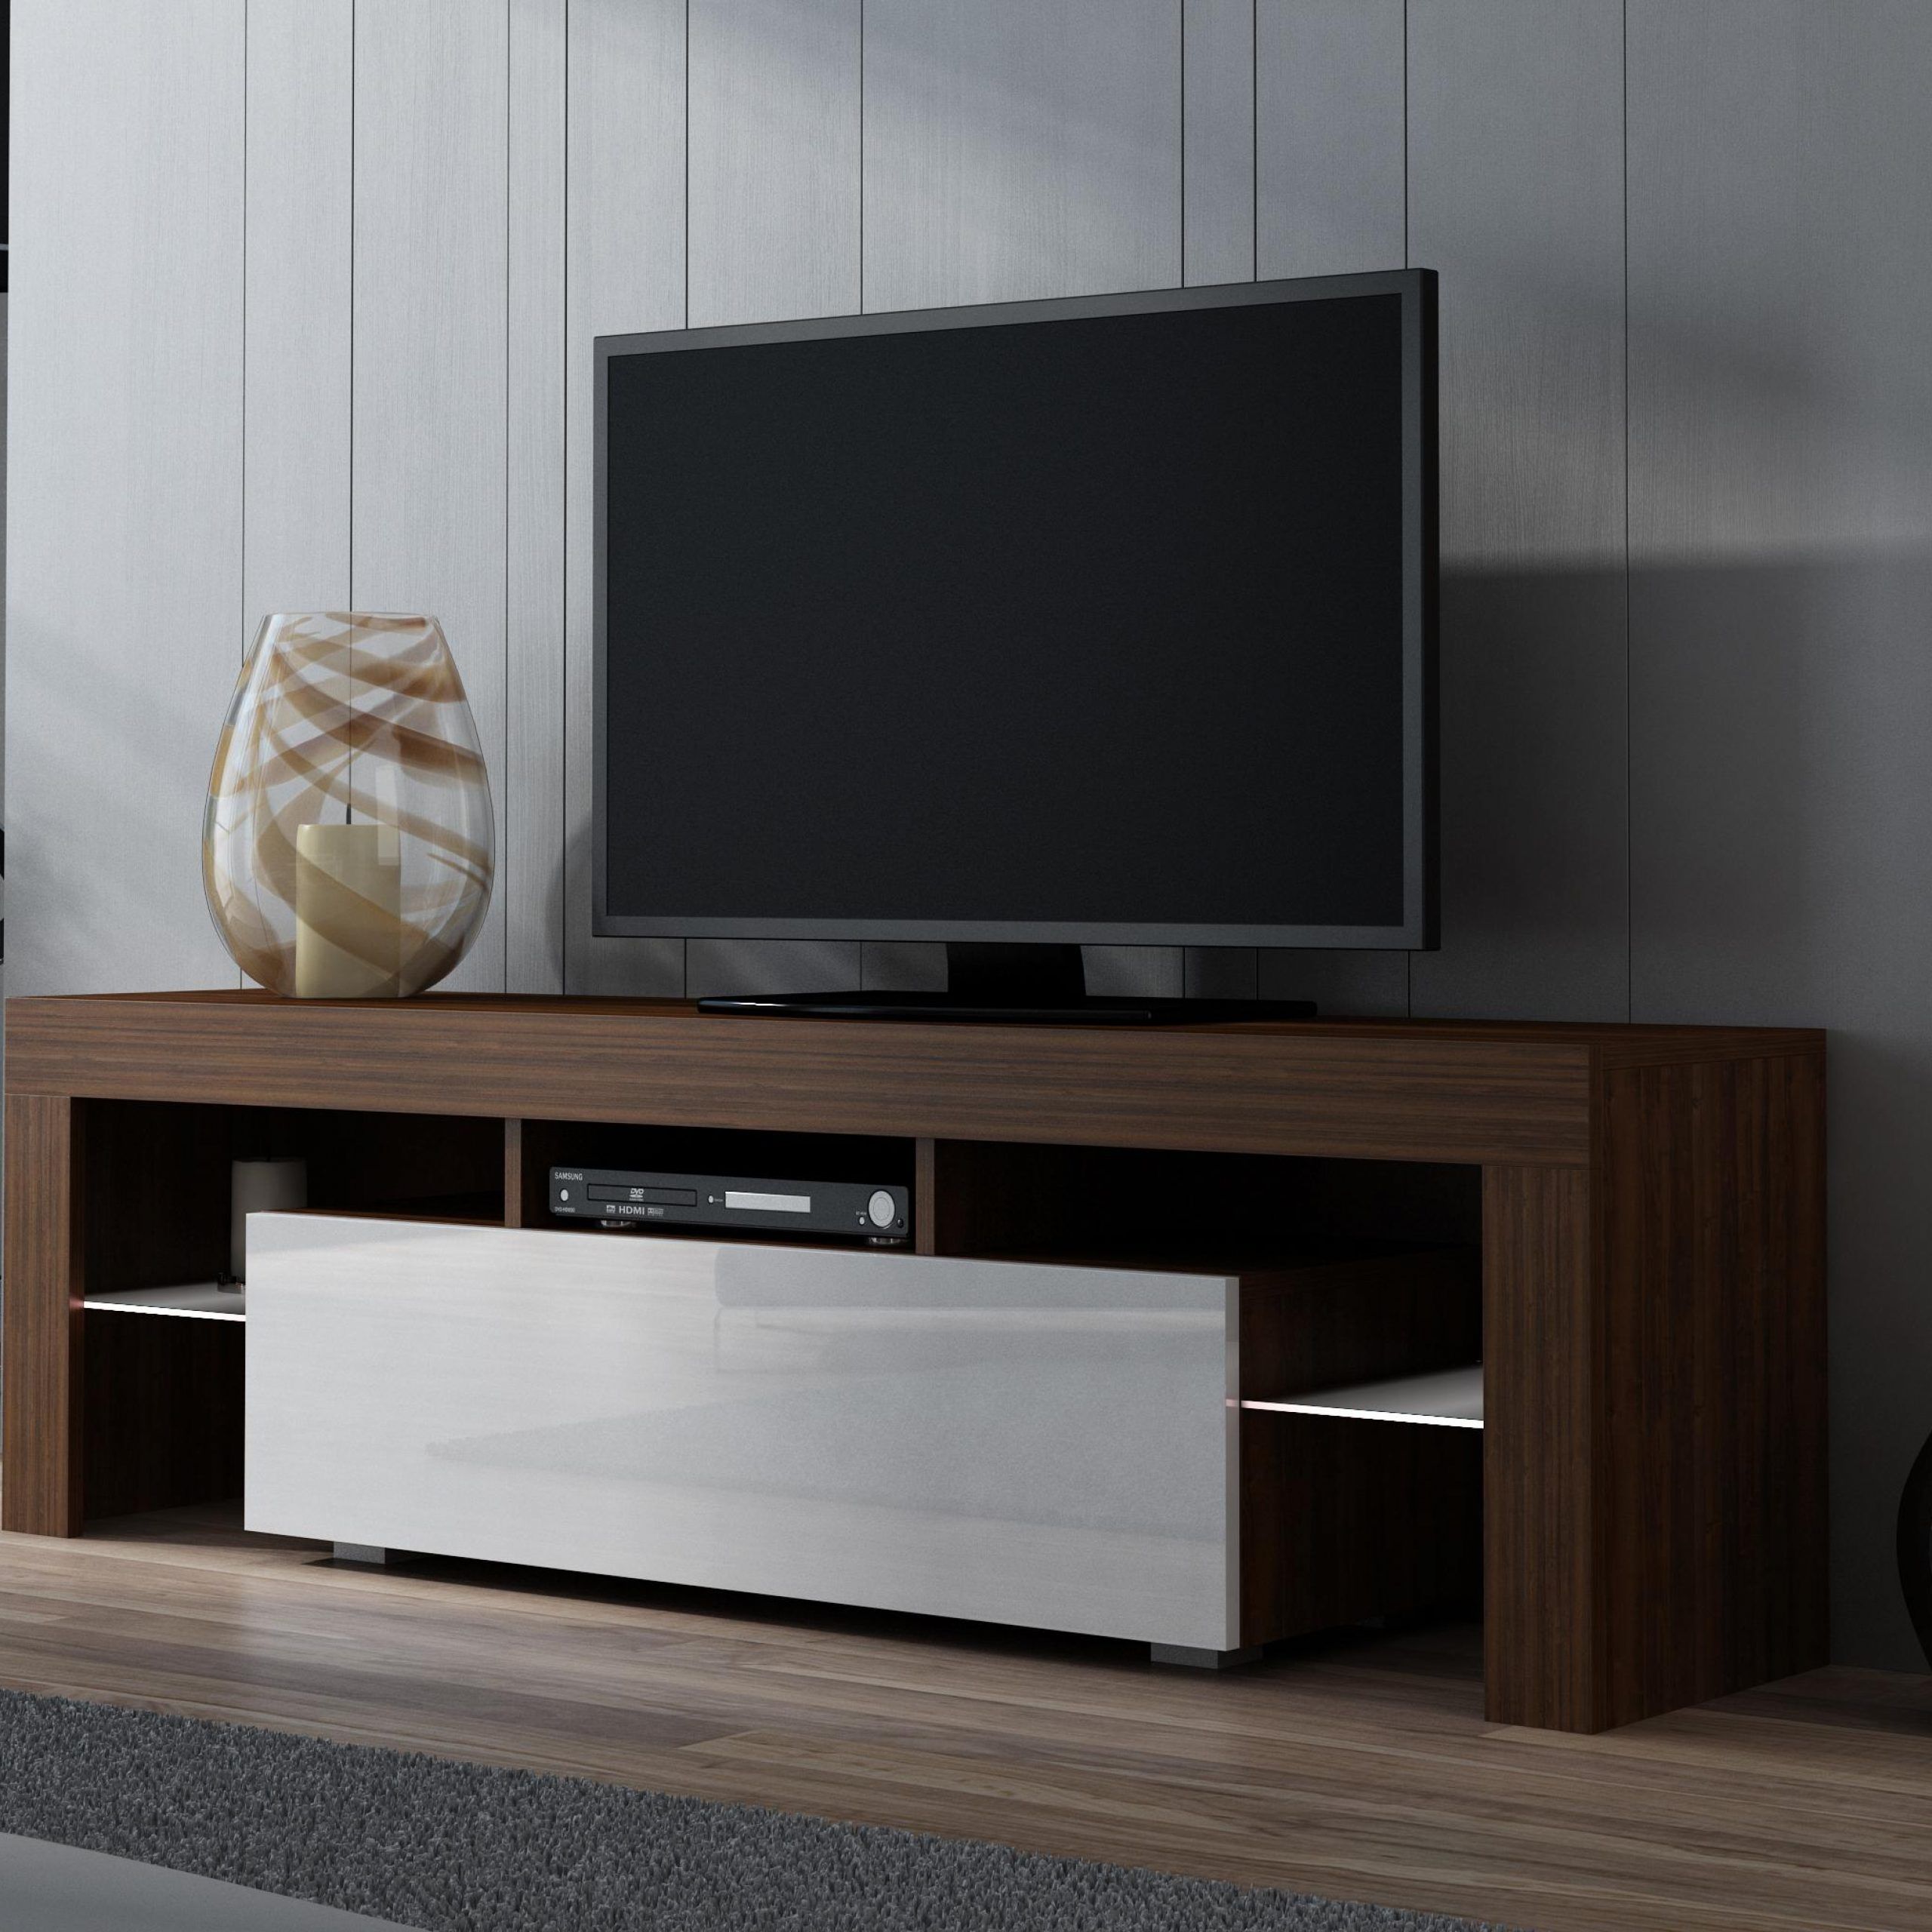 Milano 160 – Walnut Modern Tall Tv Stands For Flat Screens For Walnut Tv Cabinet (View 10 of 15)